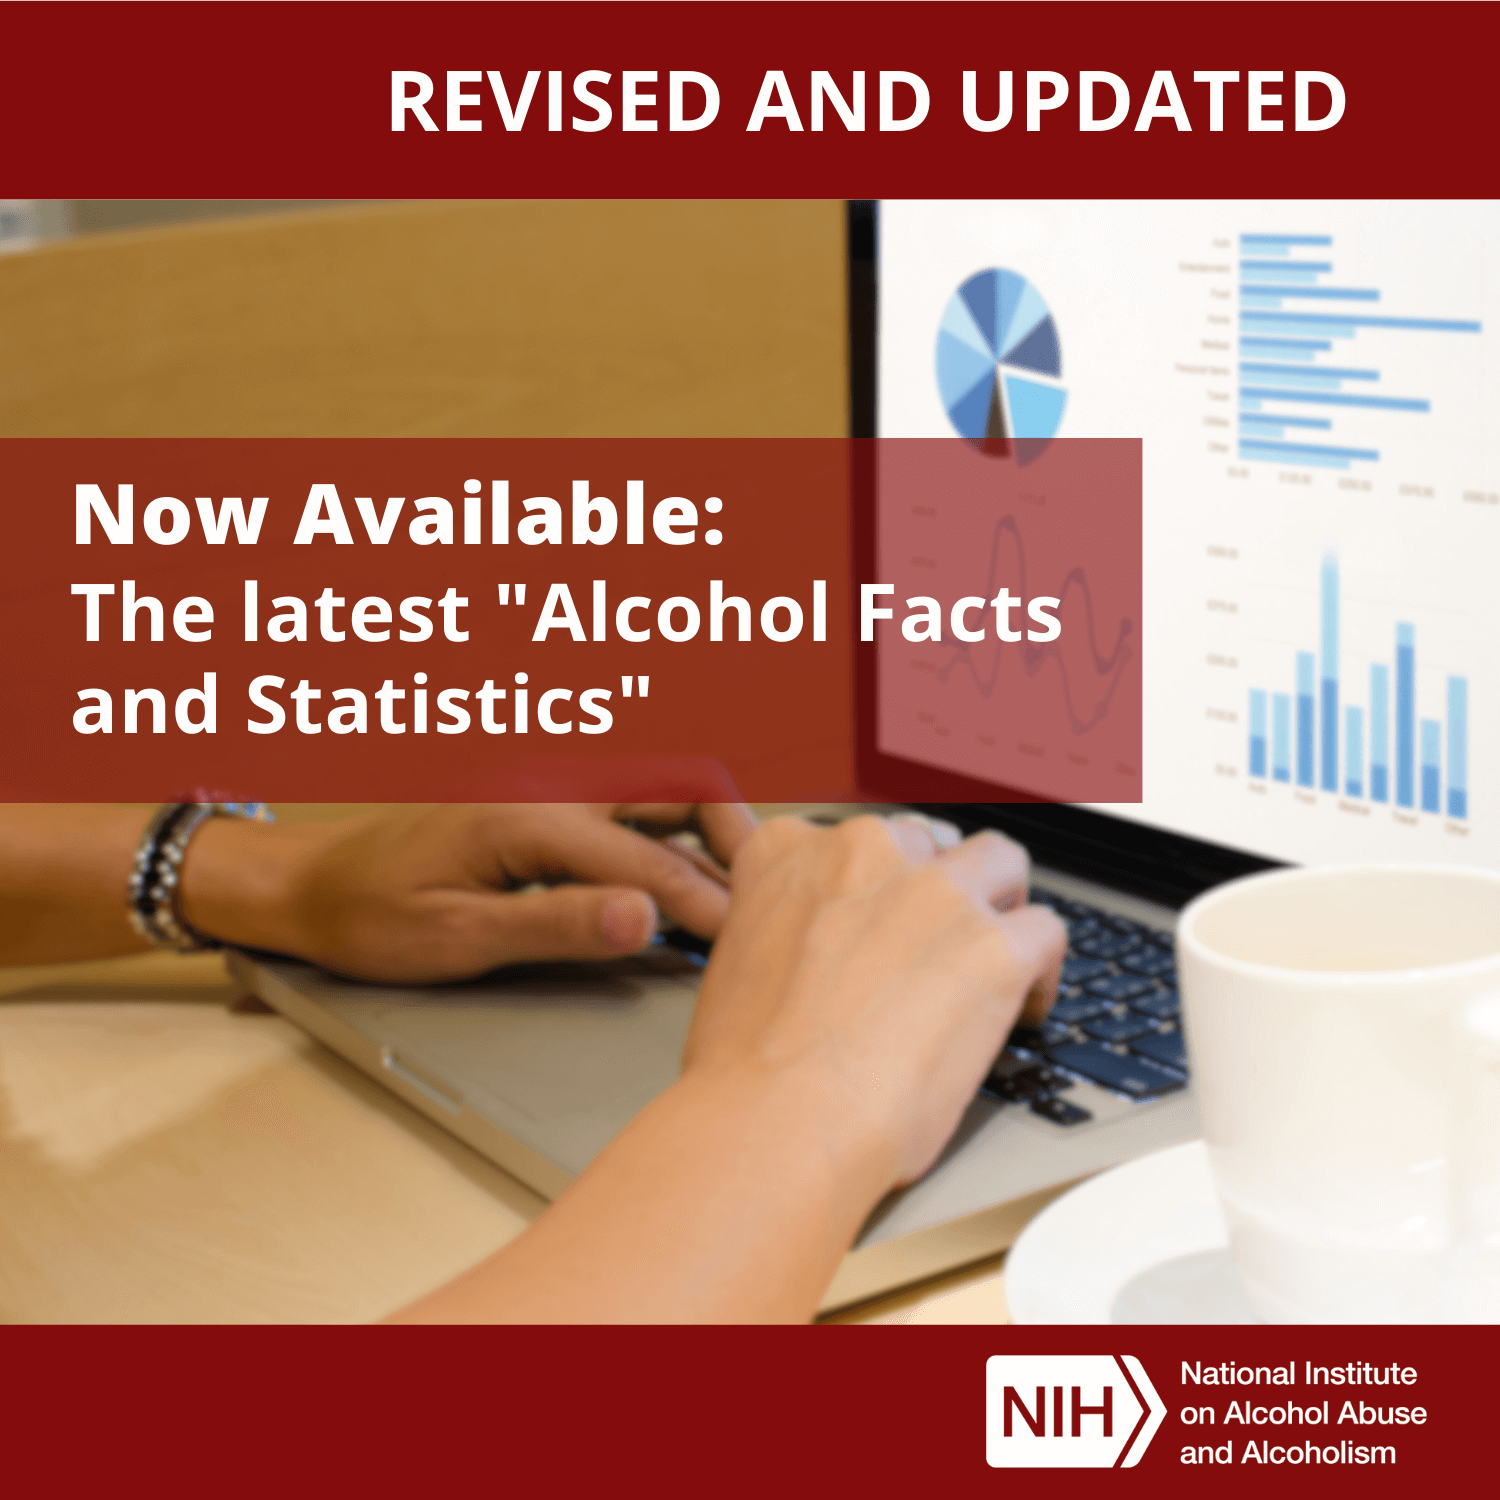 Image of a computer screen showing charts and graphs. Text overlay says: “Revised and updated. Now available: The latest ‘Alcohol Facts and Statistics’.” Logo for the National Institute on Alcohol Abuse and Alcoholism.